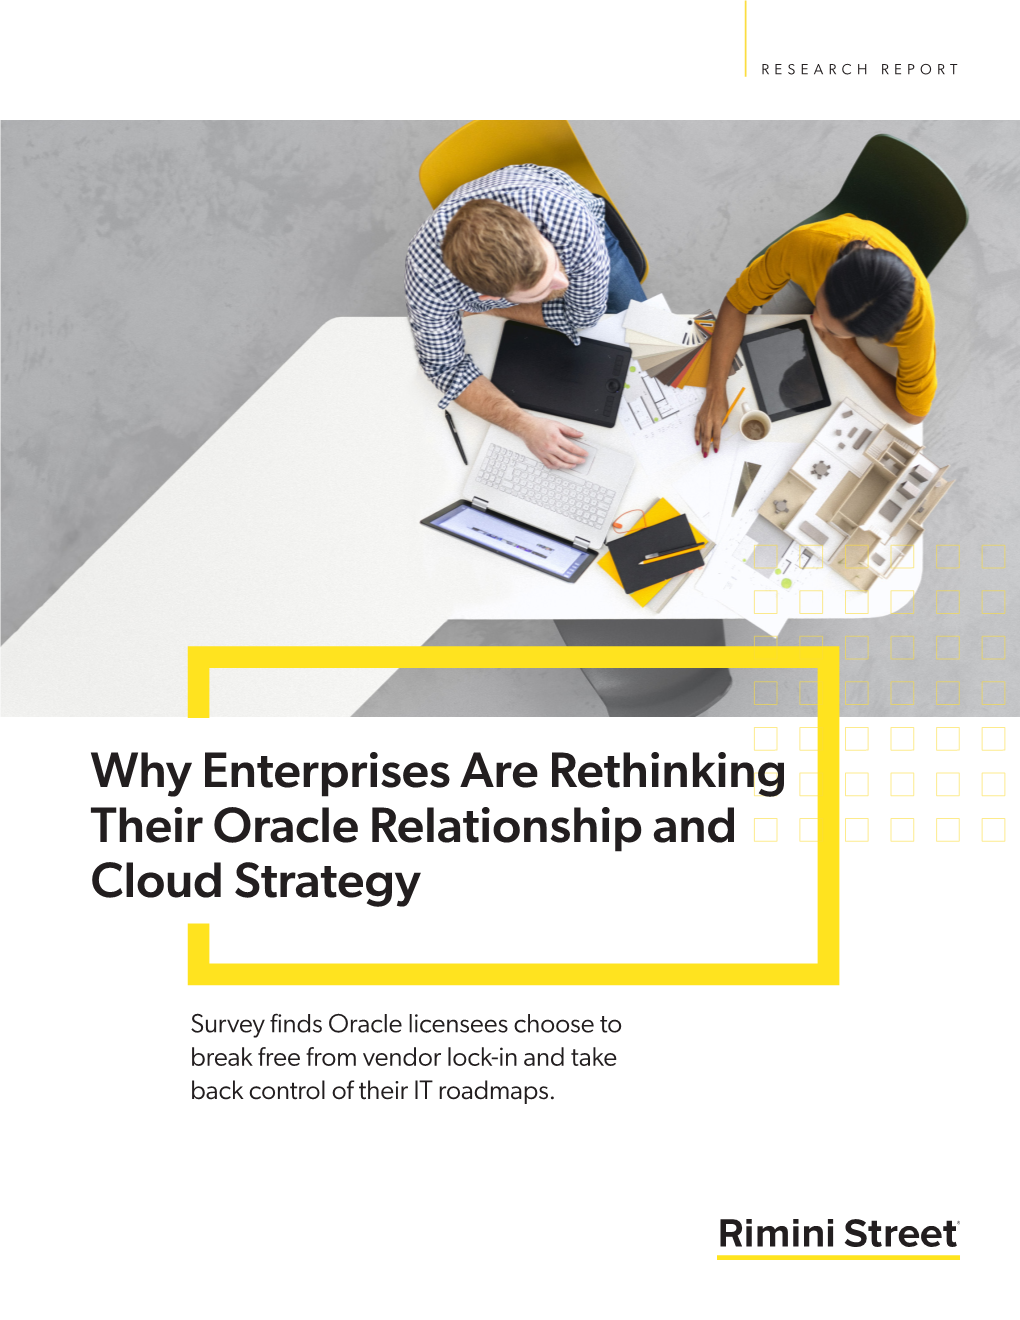 Why Enterprises Are Rethinking Their Oracle Relationship and Cloud Strategy